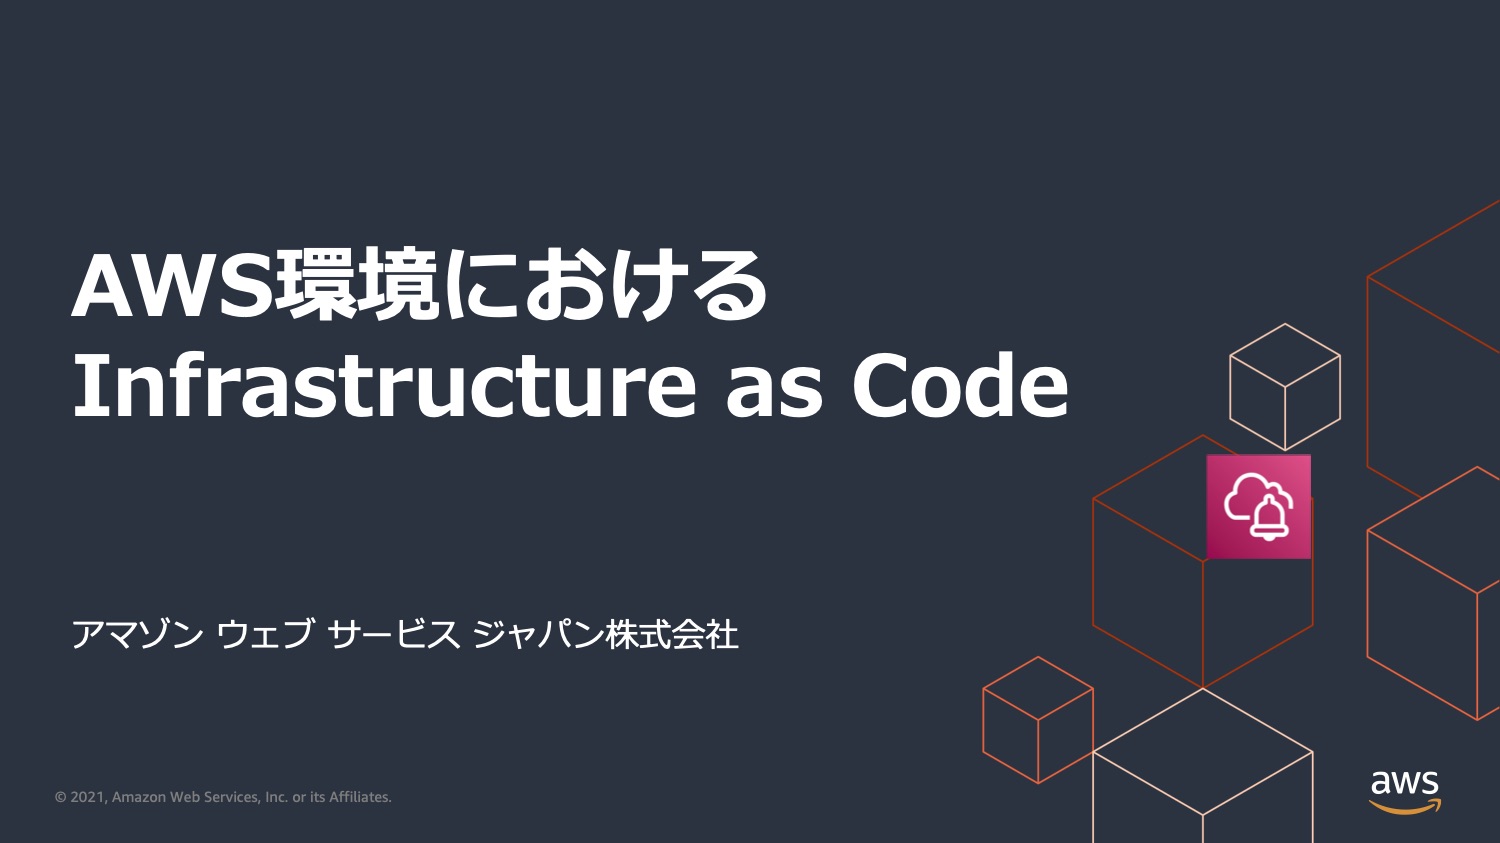 AWS環境における Infrastructure as Code